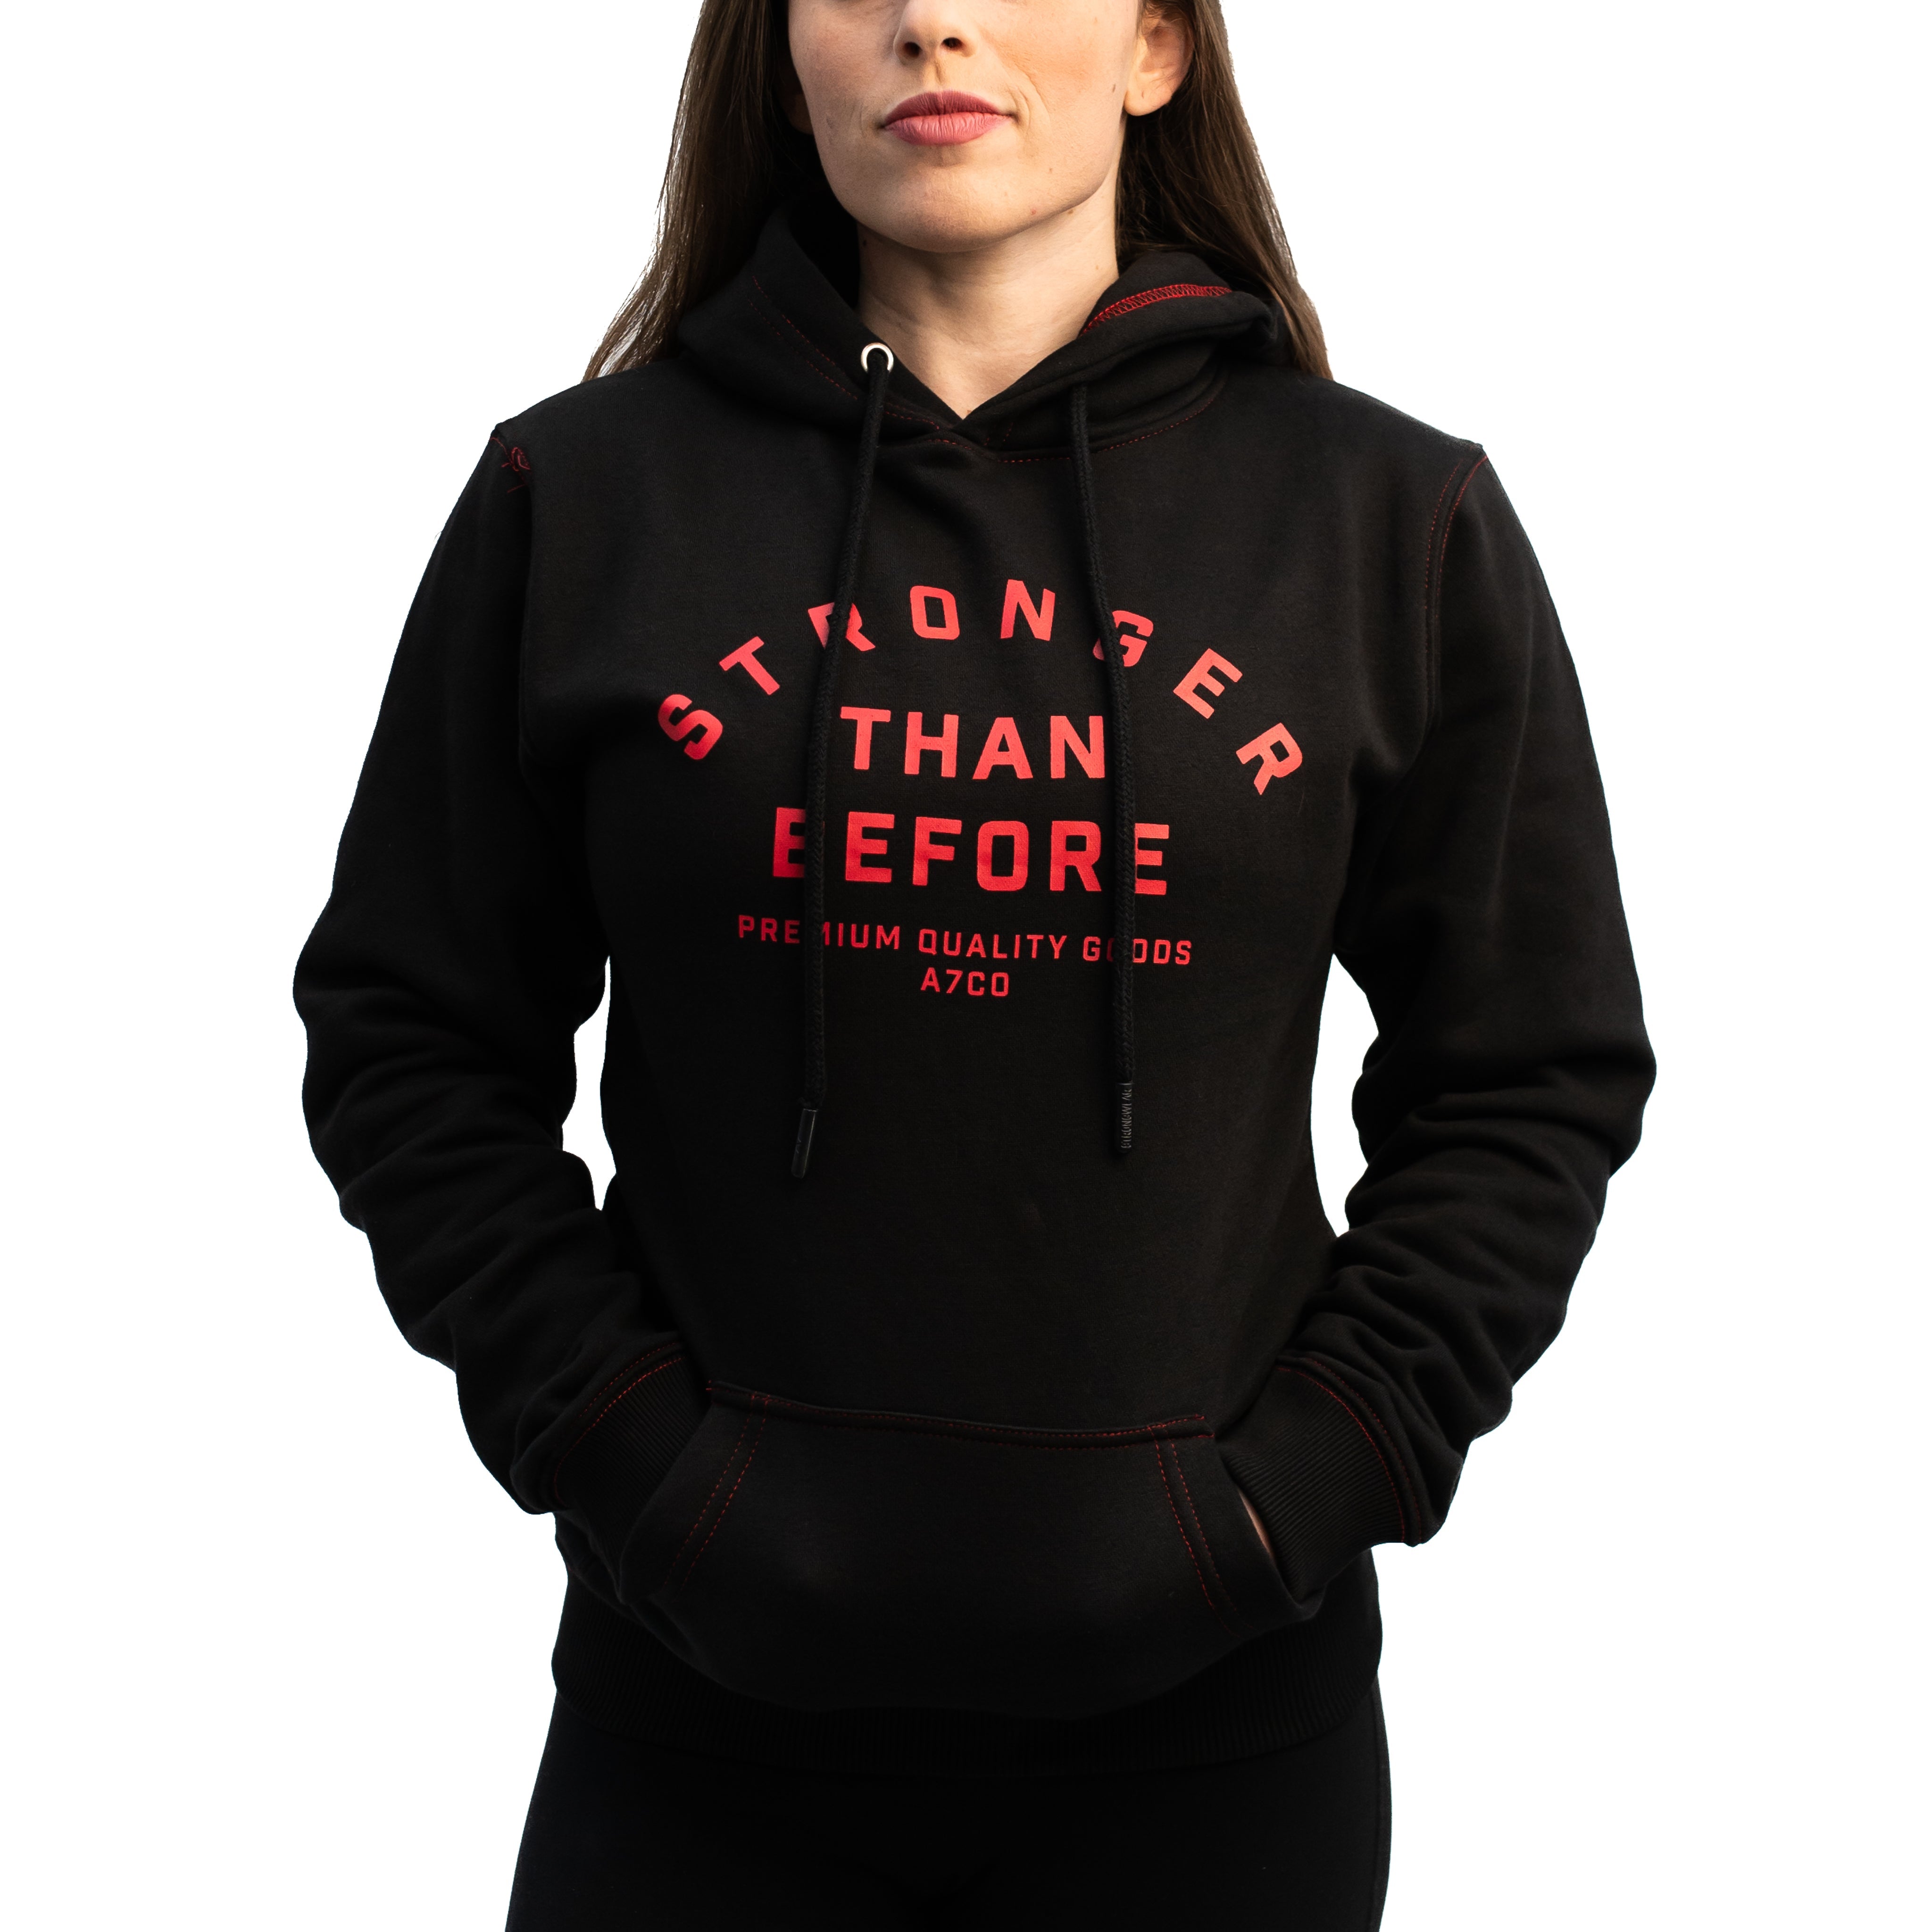 The Through Time Bar Grip Hoodie reminds us we can conquer challenges and make an impact. The future is only the continuation of our progress. Purchase Through Time Bar Grip Hoodie from A7 UK and A7 Europe. The silicone grip helps with slippery commercial benches and bars and anchors the barbell to your back. A7UK has the best Powerlifting apparel for all workouts. Available in UK and Europe including France, Italy, Germany, the Netherlands, Sweden and Poland.